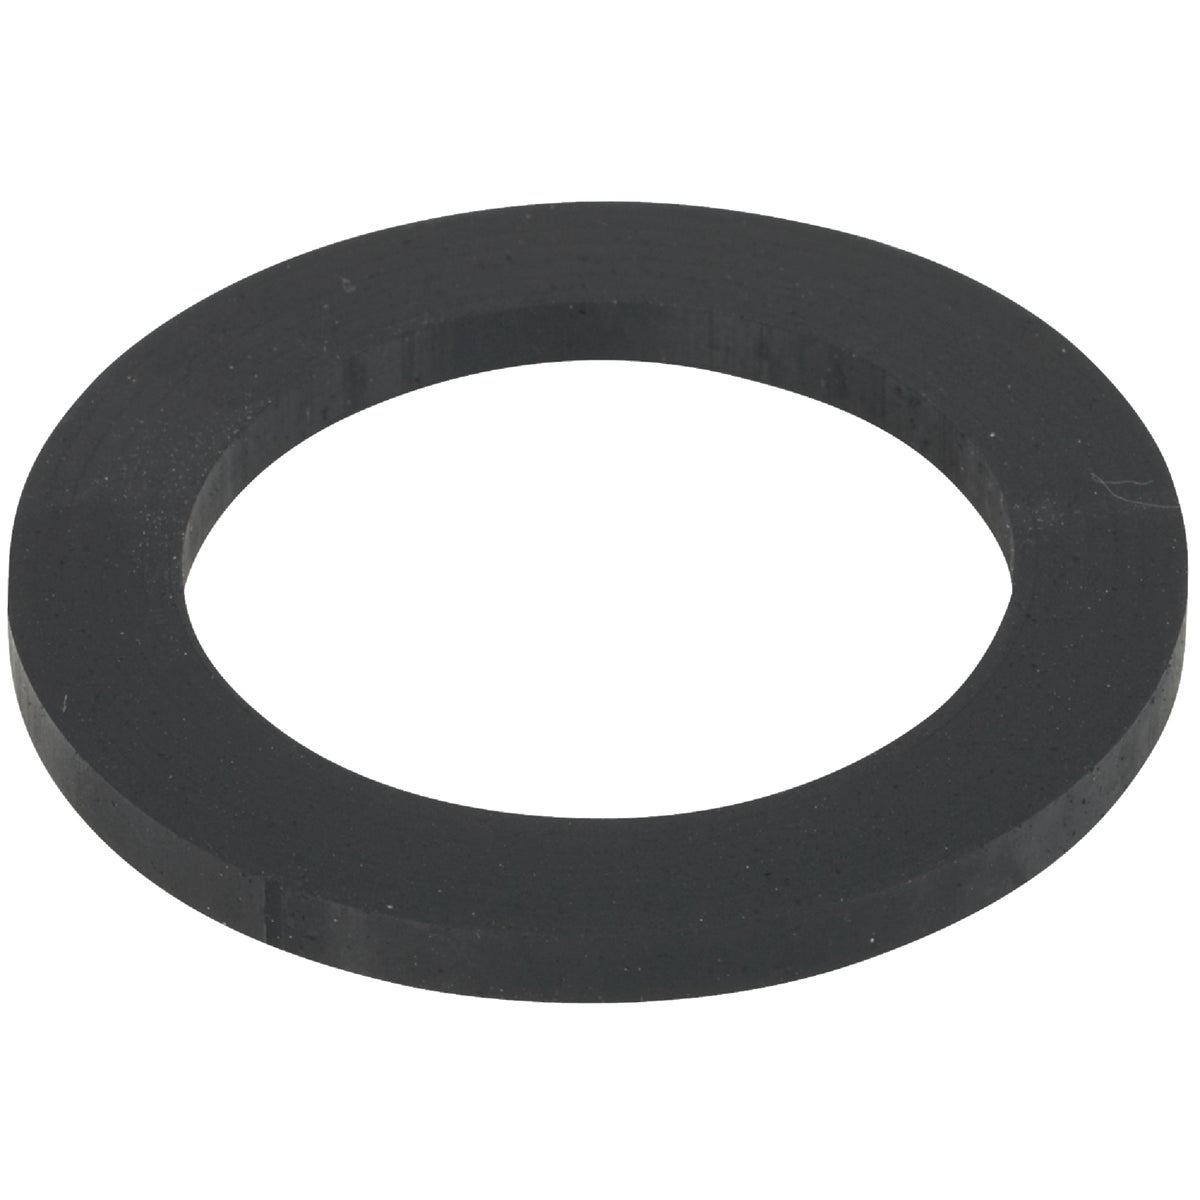 Item 406317, Flat rubber to fit waste and overflow shoes.